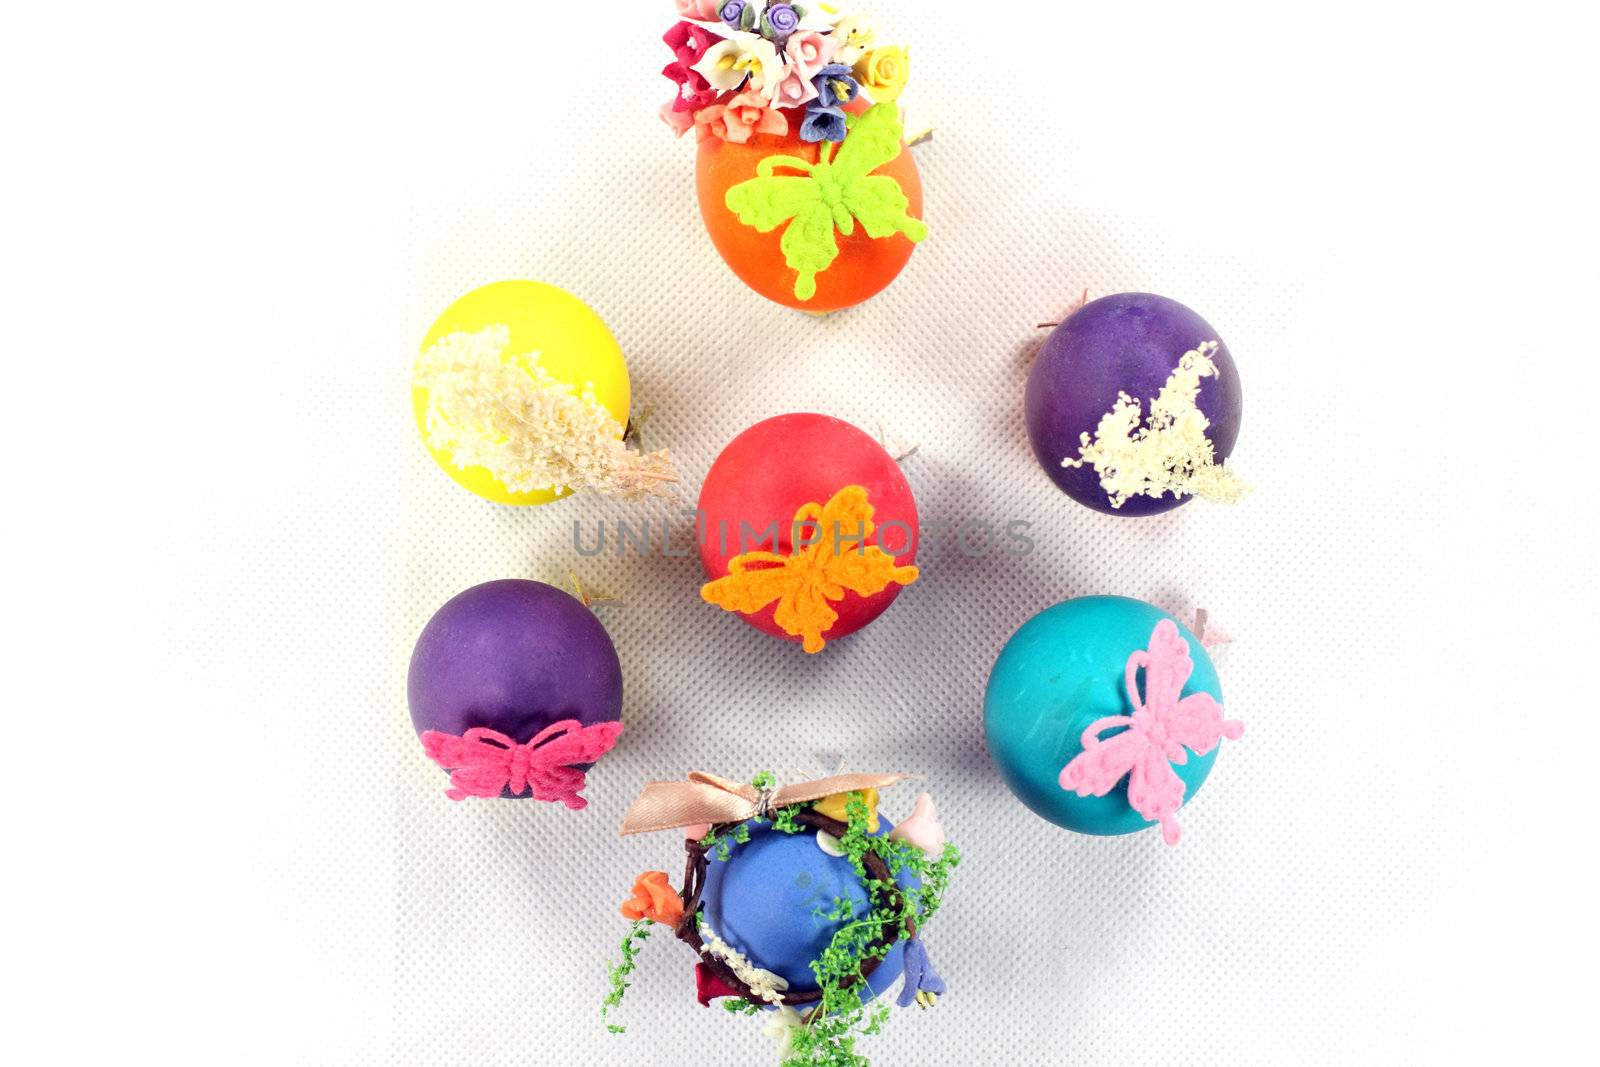 Eggs, Easter, a flower, the butterfly, dark blue, red, a holiday, Orthodoxy, Christianity, meal, food, stand